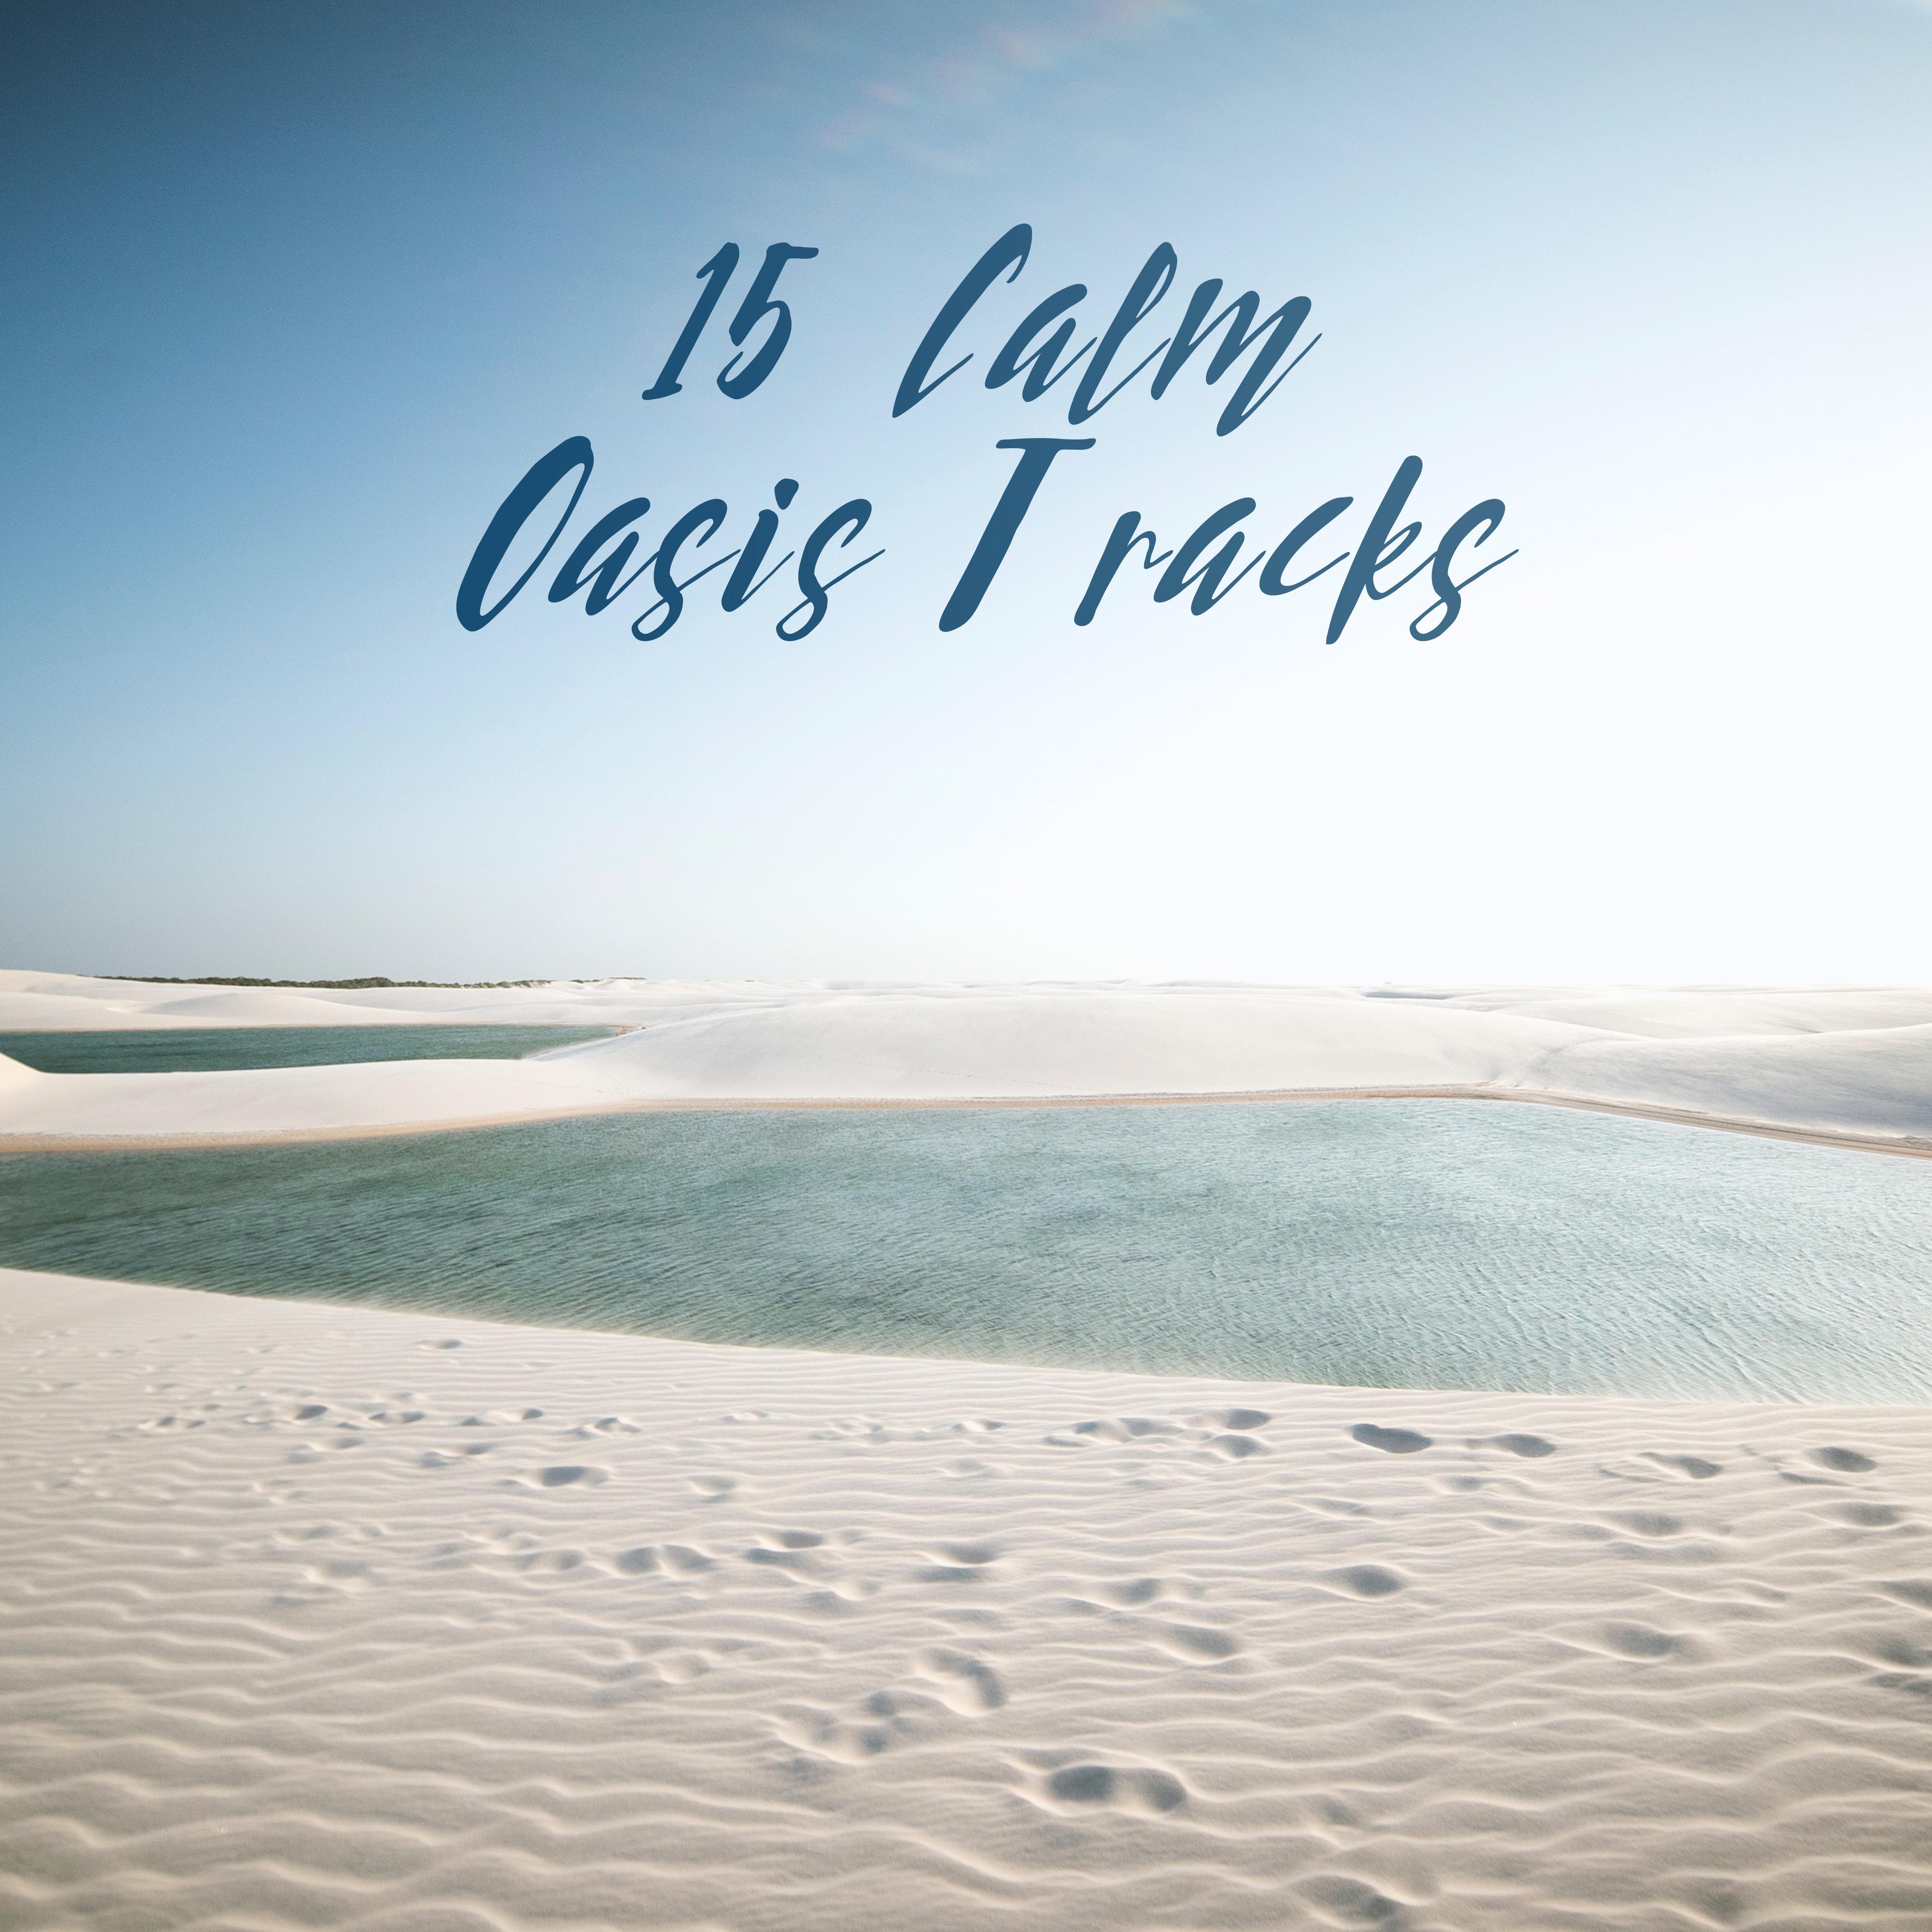 15 Calm Oasis Tracks: Deep Meditation, Pure Relaxation, Calm Down, Inner Harmony, Reduce Stress, Relax Zone, Pure Mind, Zen